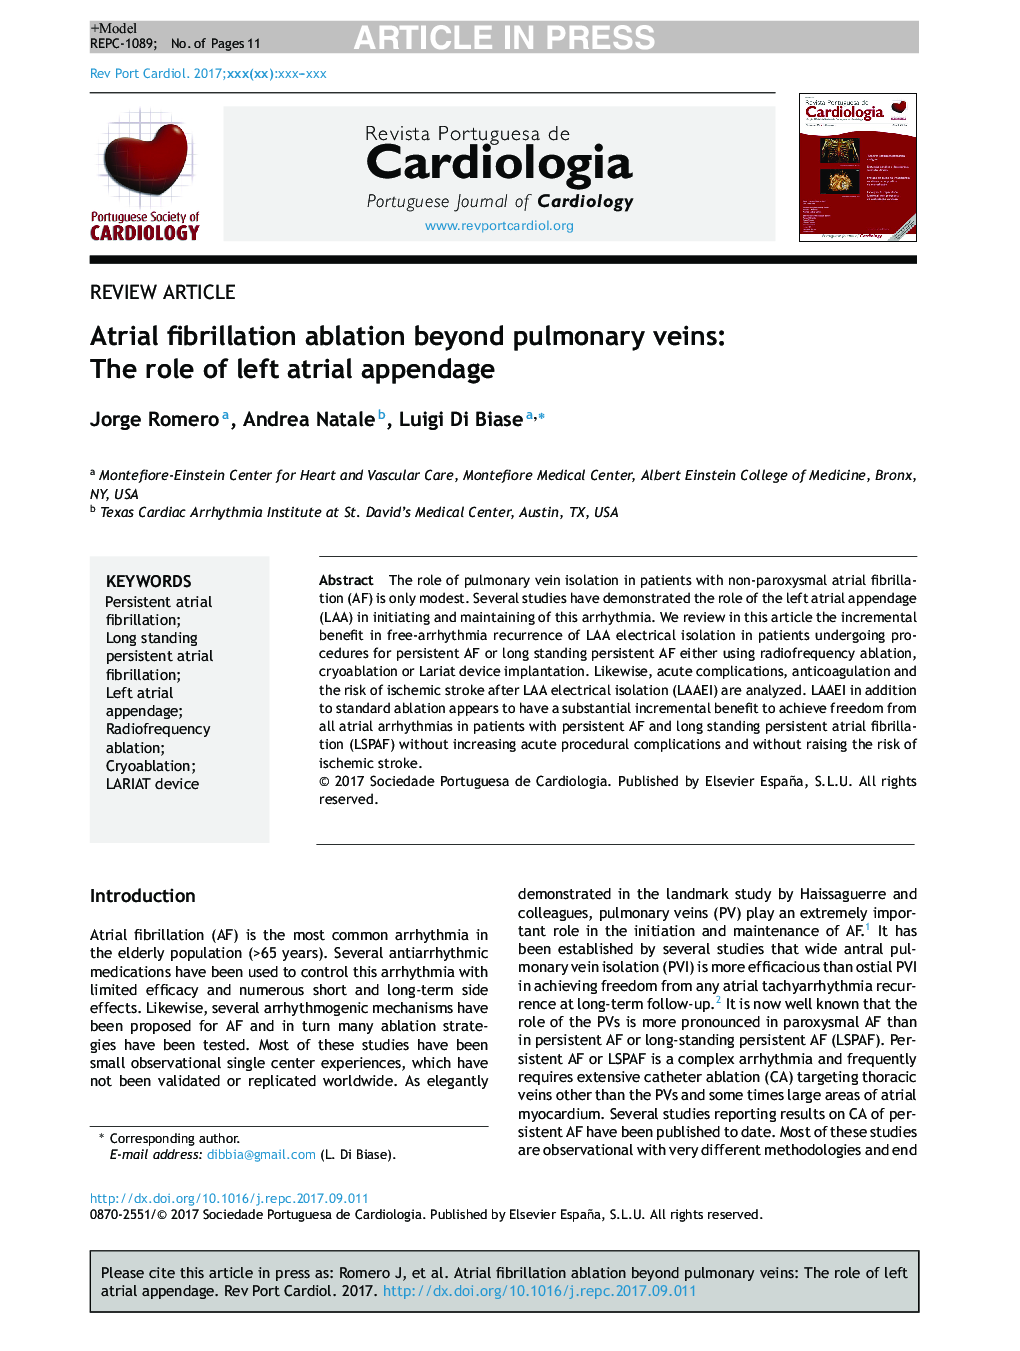 Atrial fibrillation ablation beyond pulmonary veins: The role of left atrial appendage